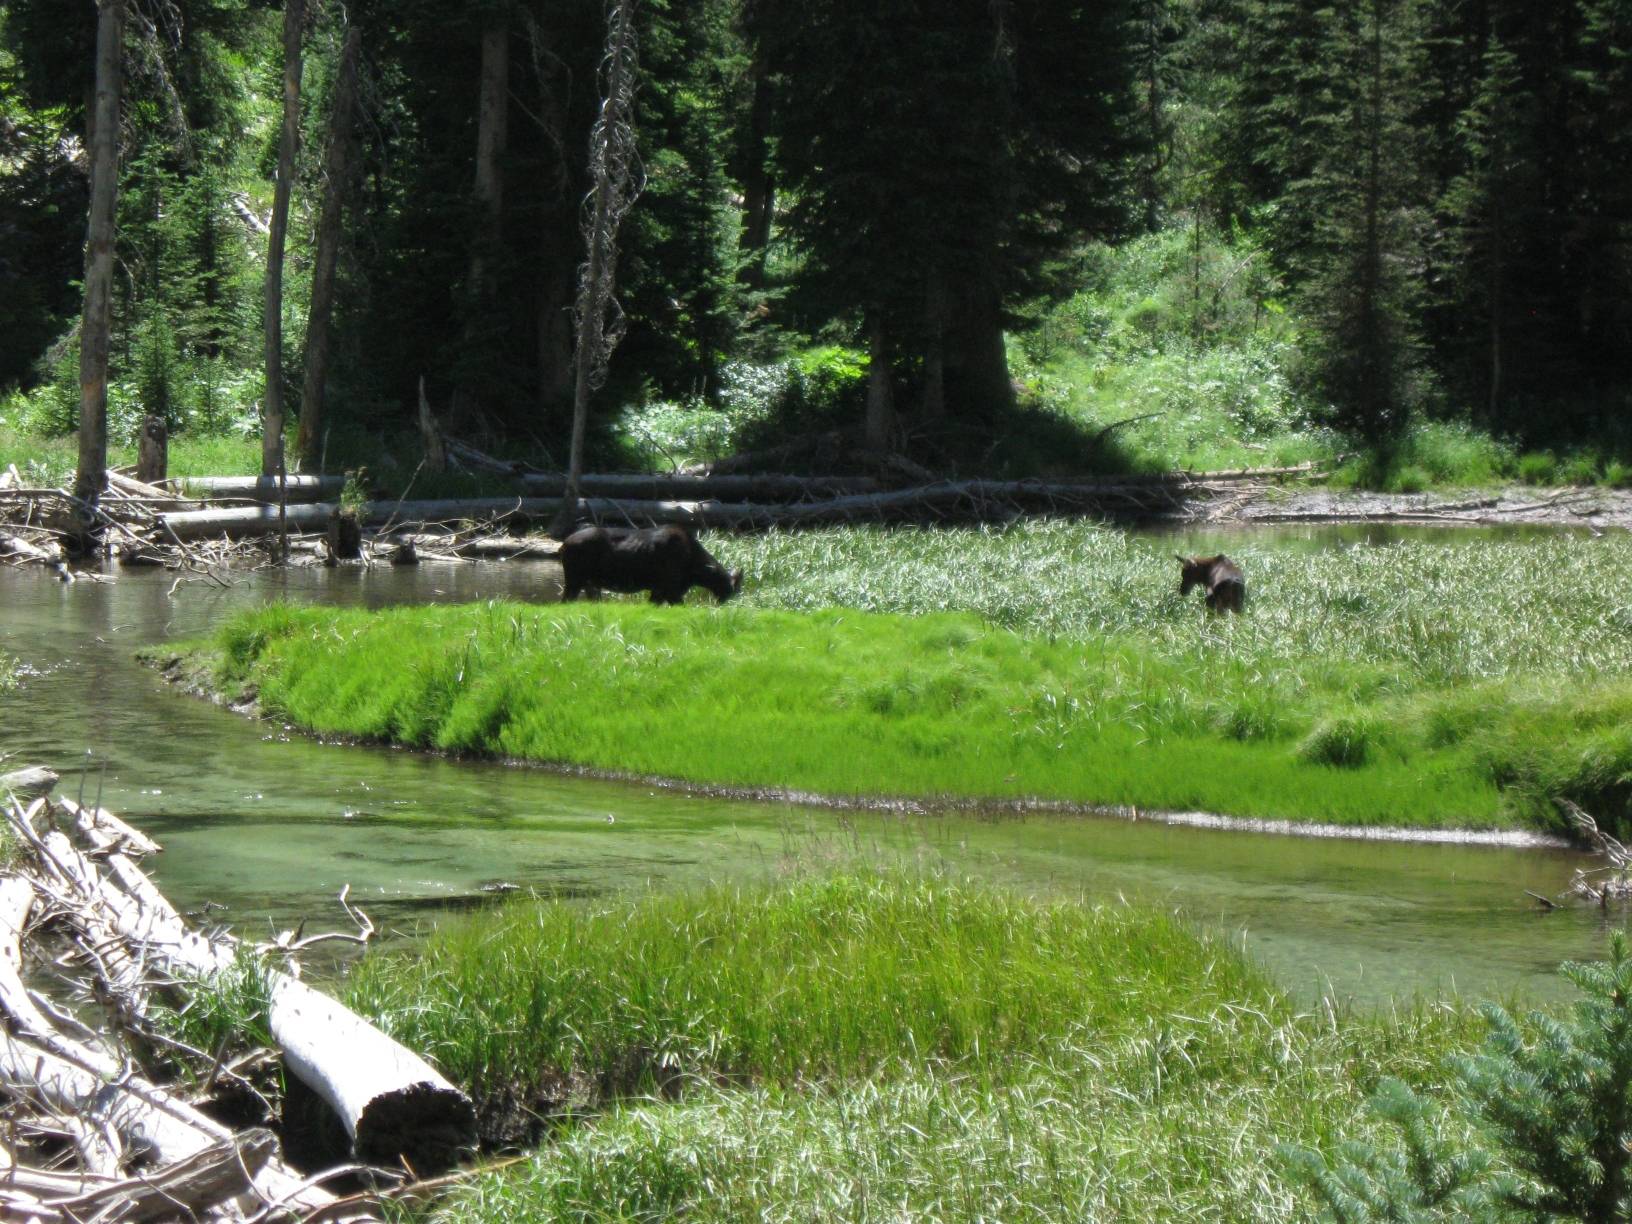 Image: A mother moose with her calf on the southern bank of the Cascade Creek